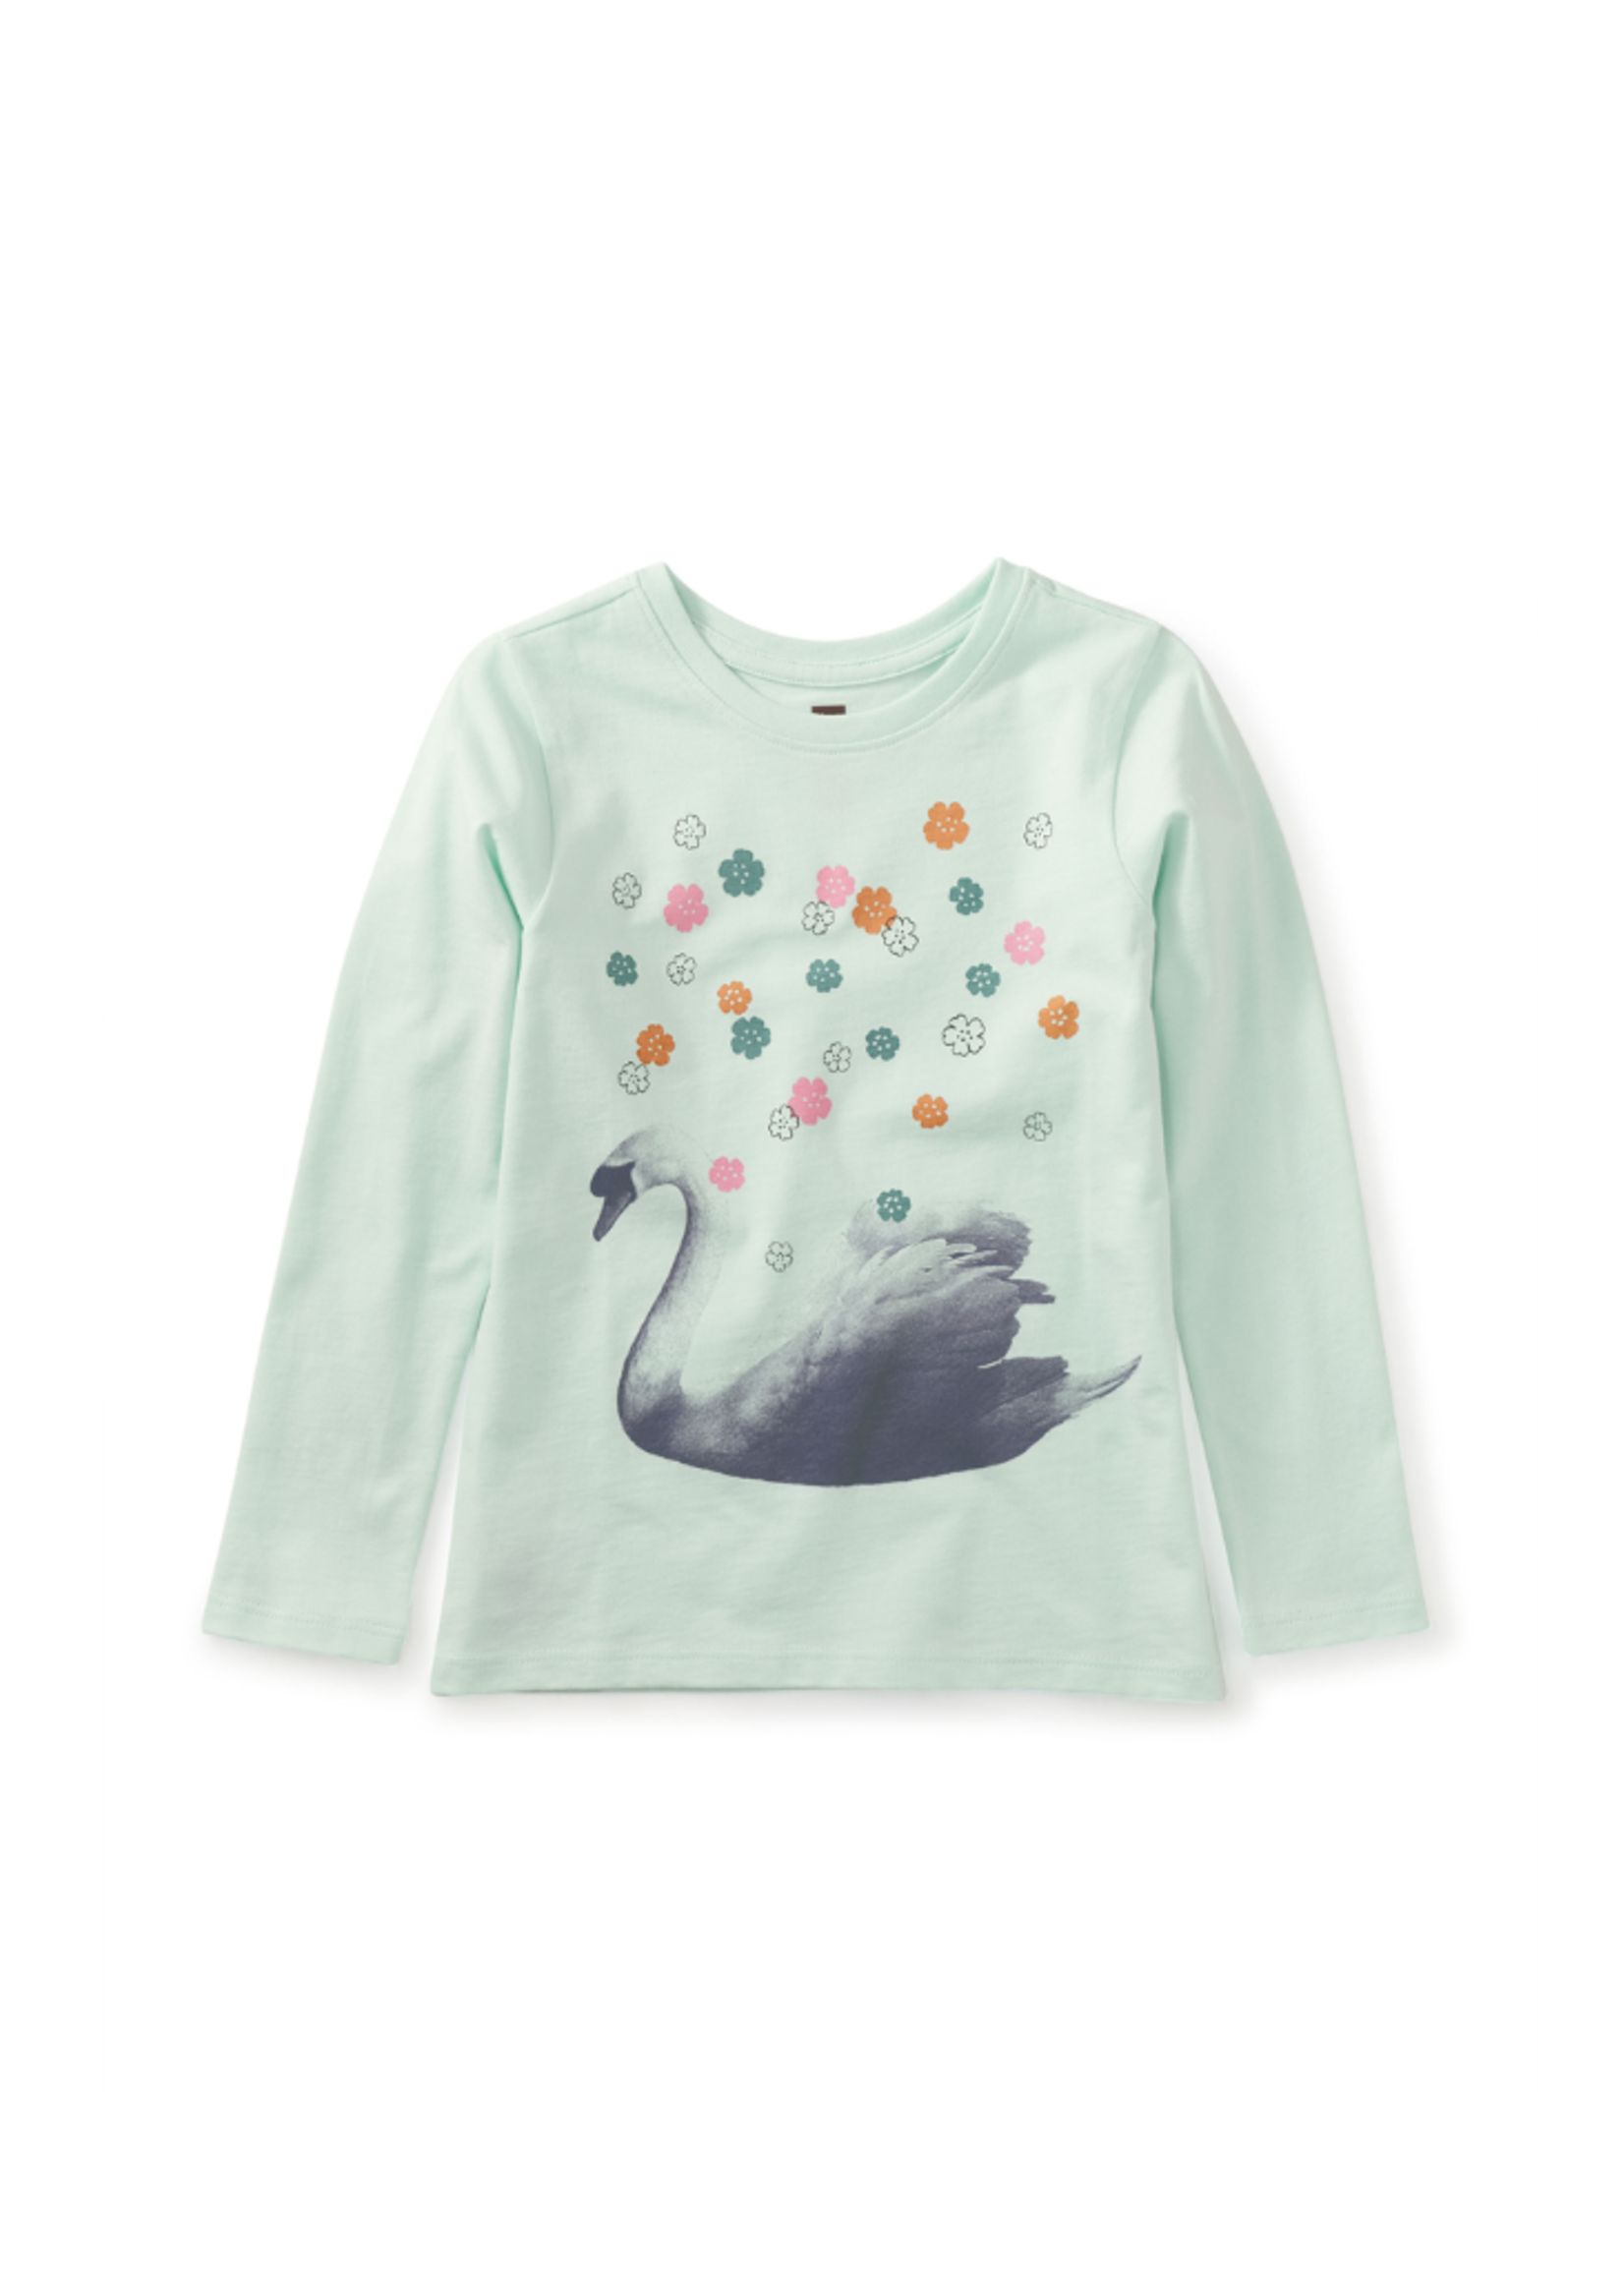 Tea Collection Swan Song Graphic Tee